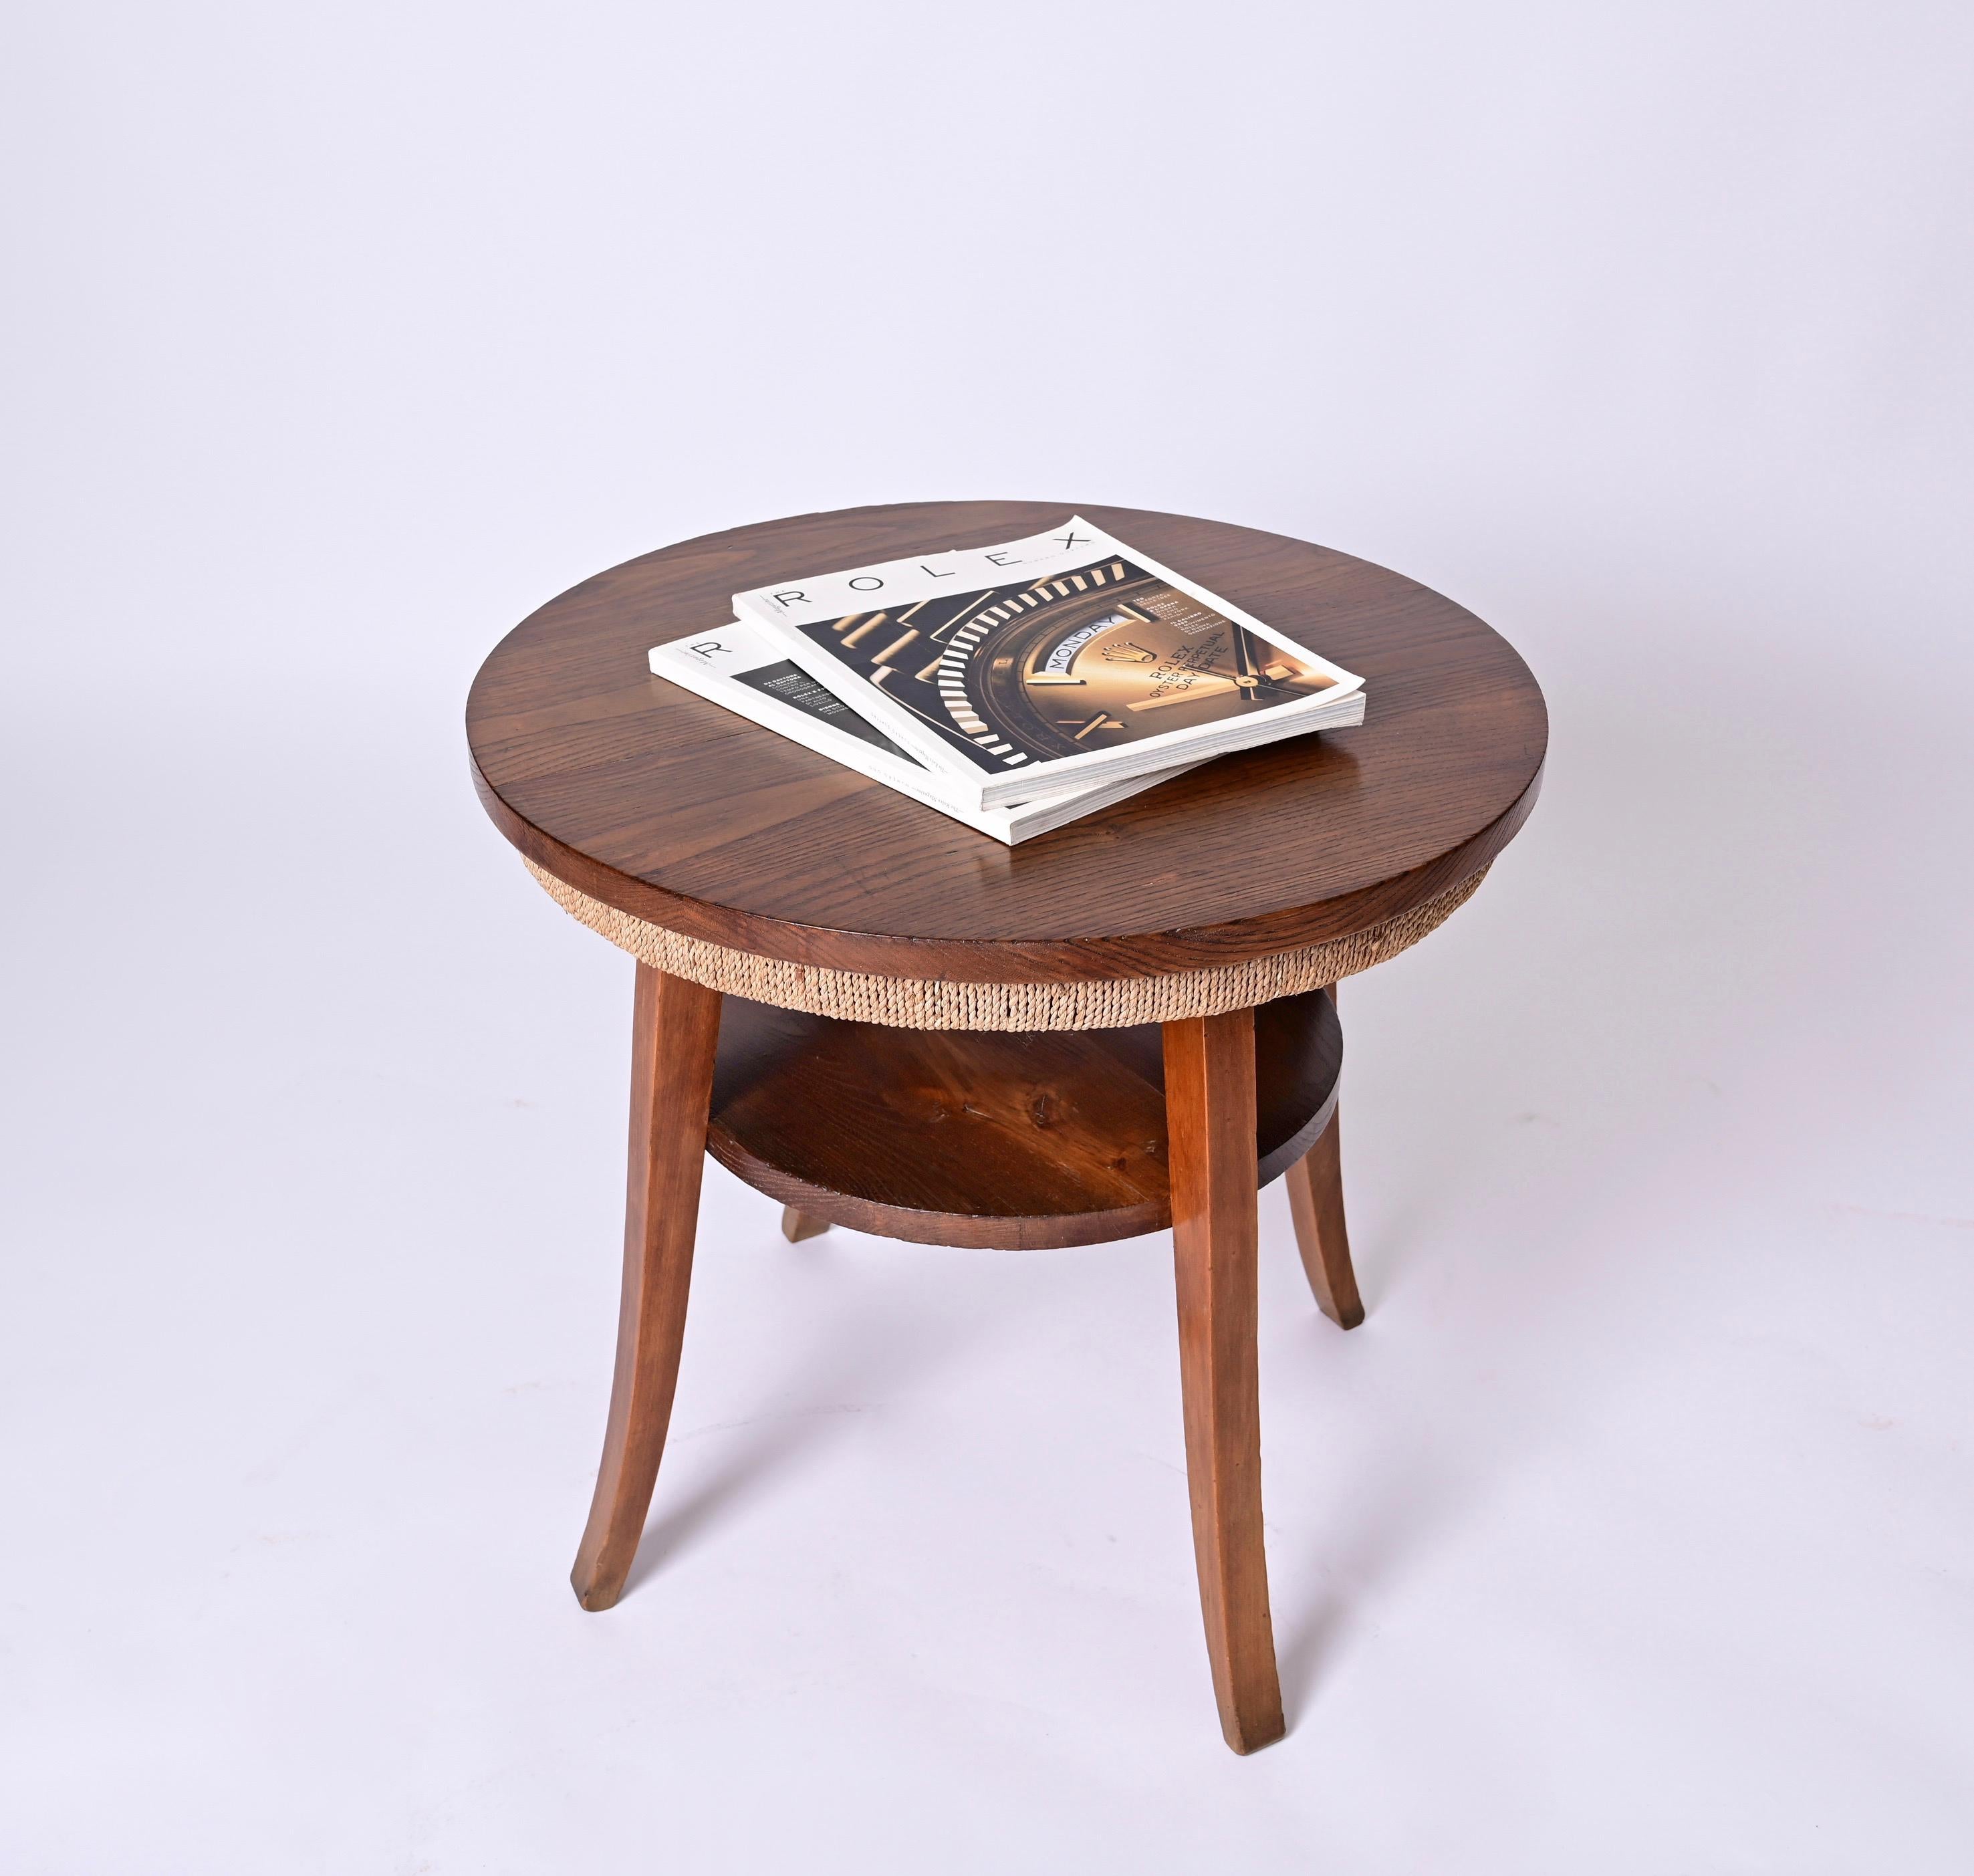 Midcentury Two-Tier Round Rope and Chestnut Wood Italian Coffee Table, 1950s For Sale 10